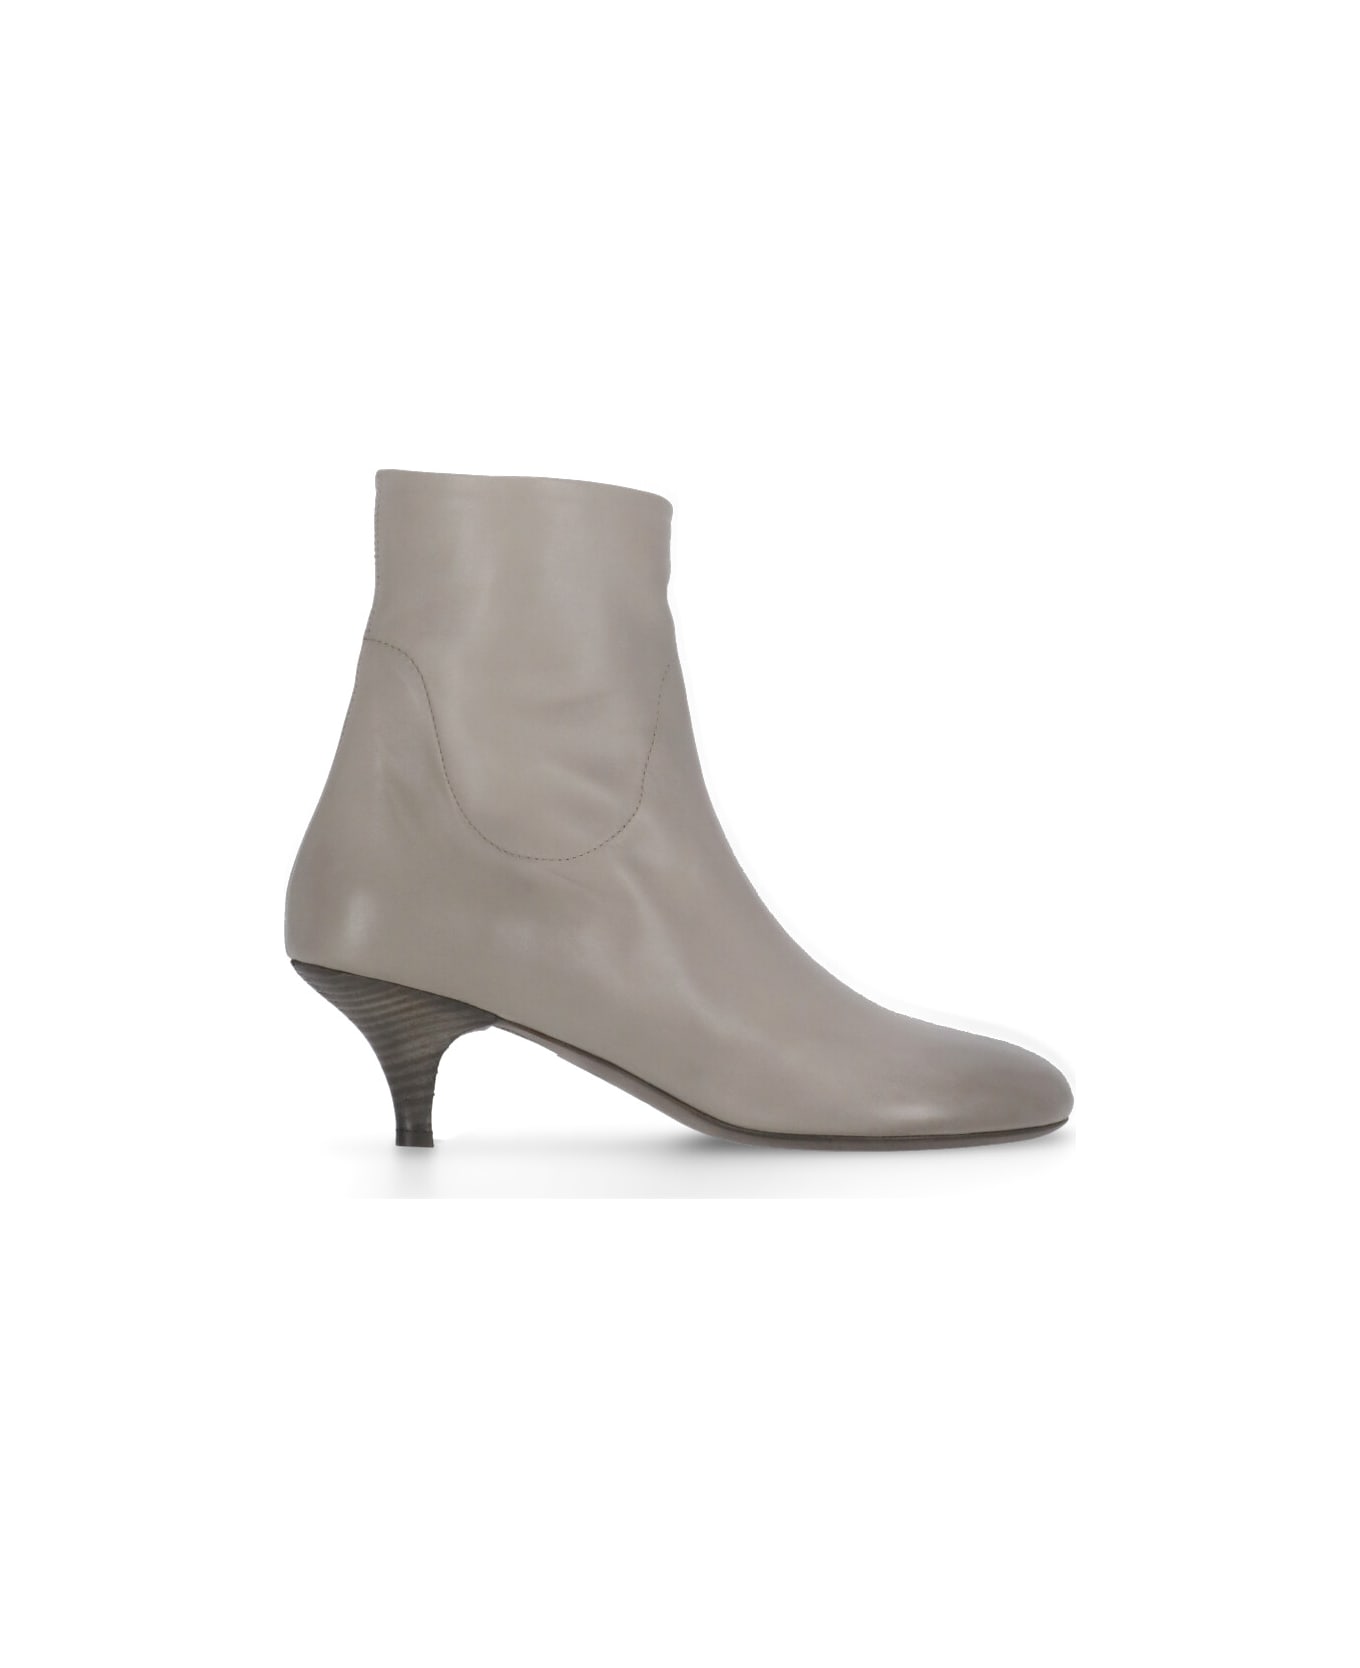 Marsell Spilla Ankle Boots - Grey ブーツ